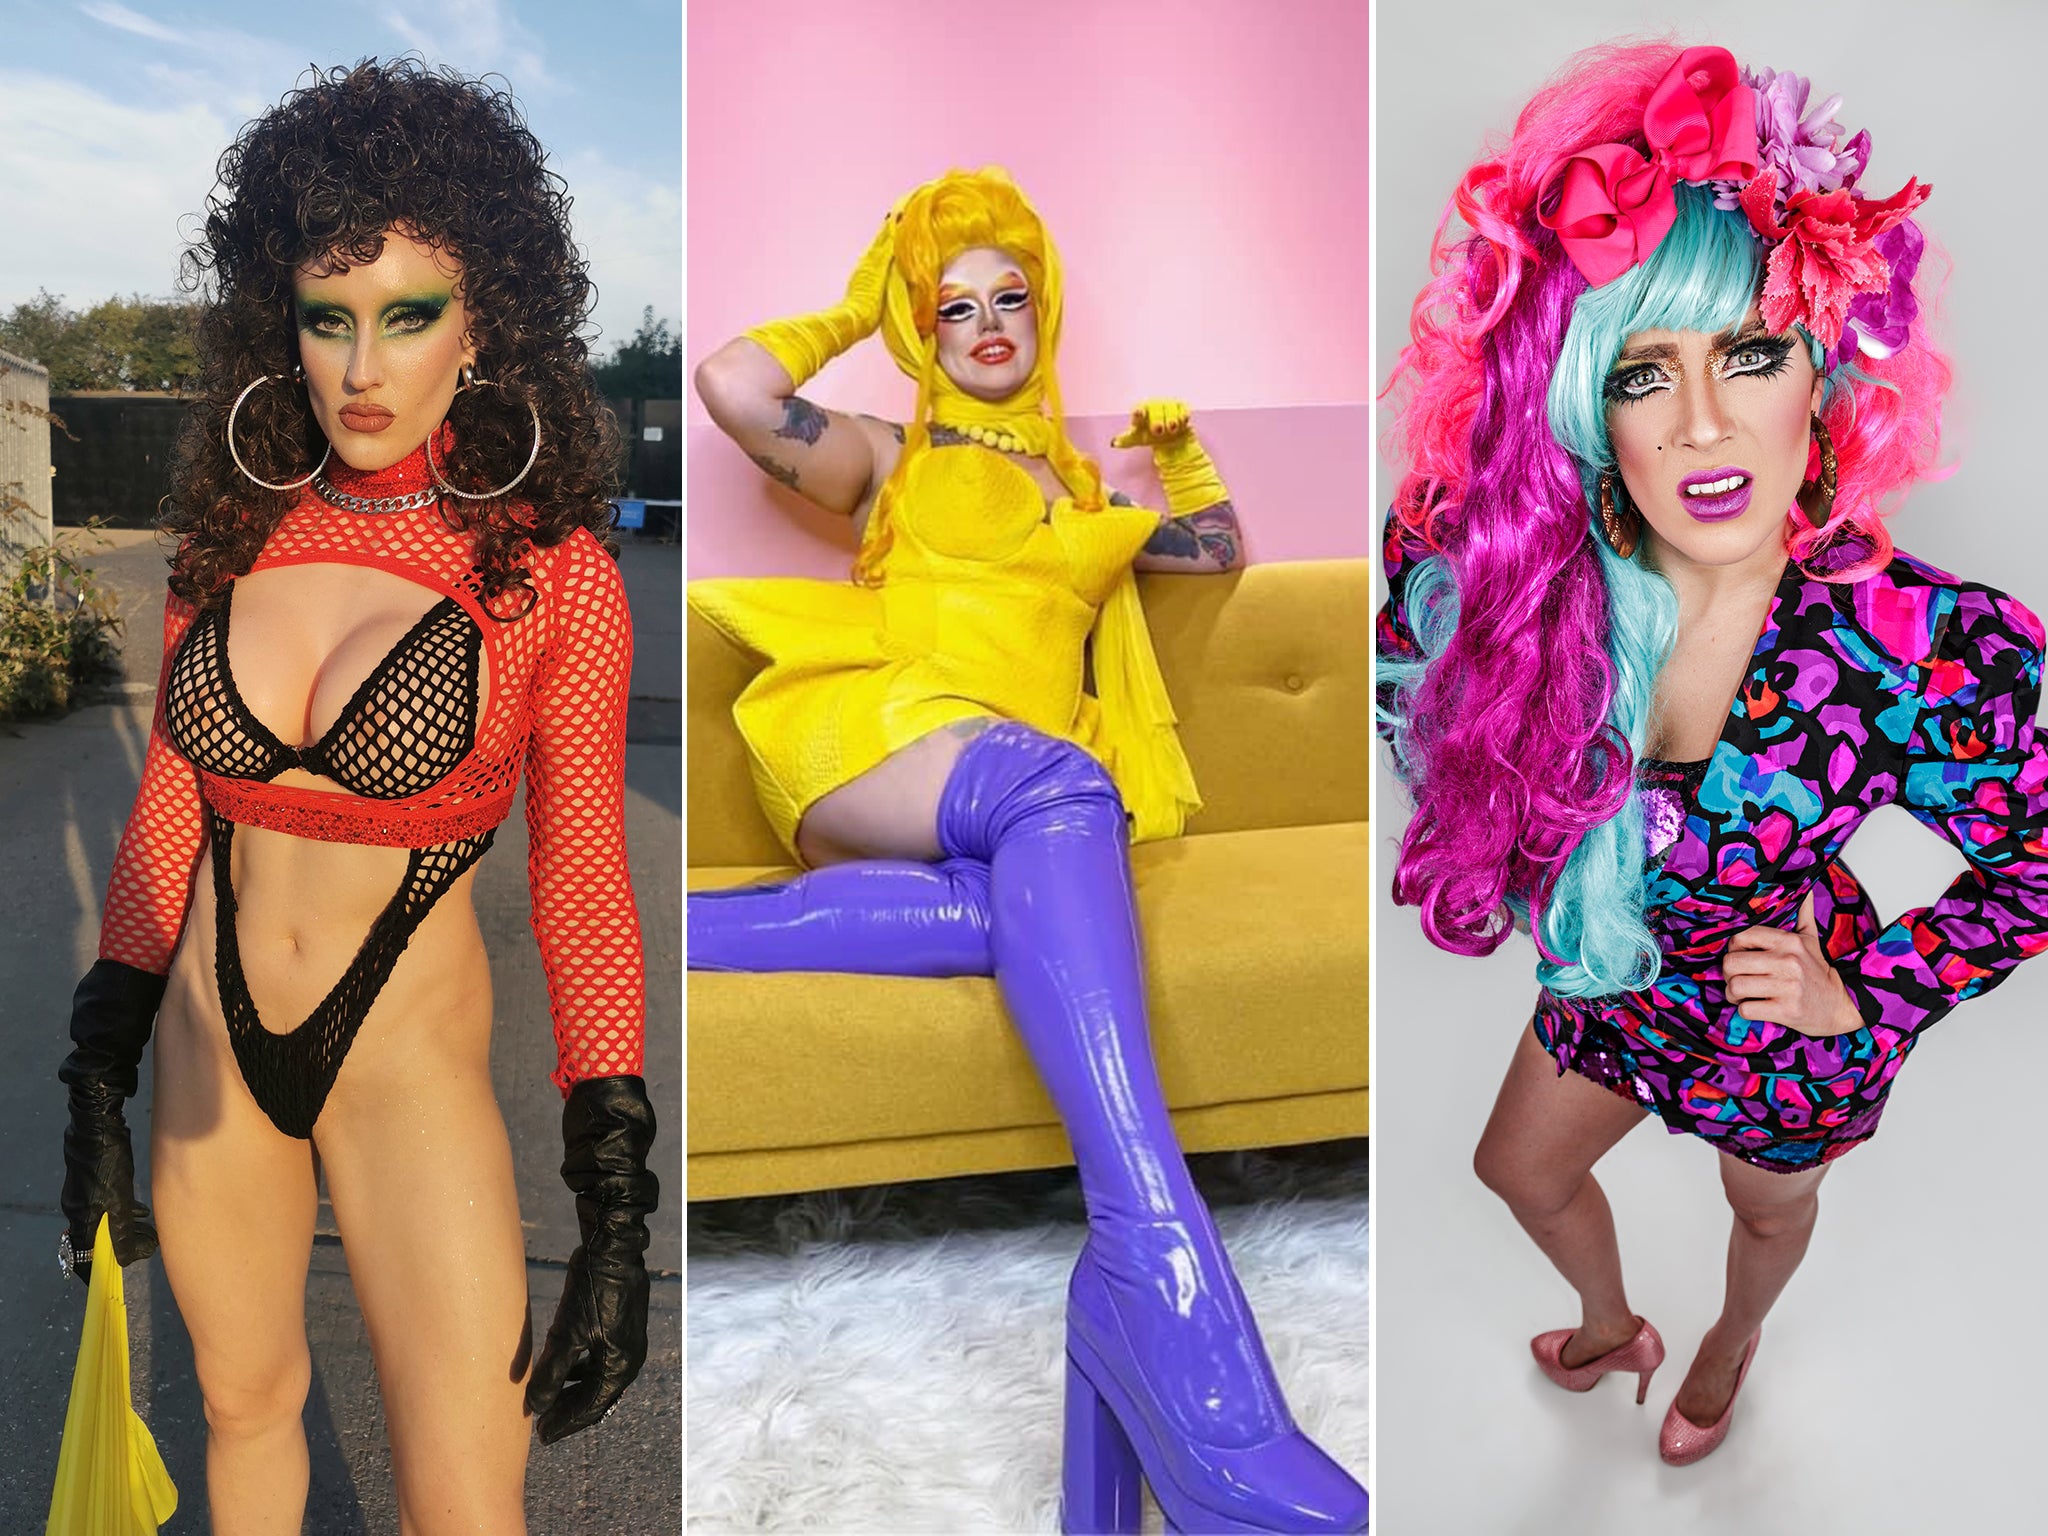 There is definitely a demographic of gay men that think I should shut up  and sit down': Meet the women doing drag